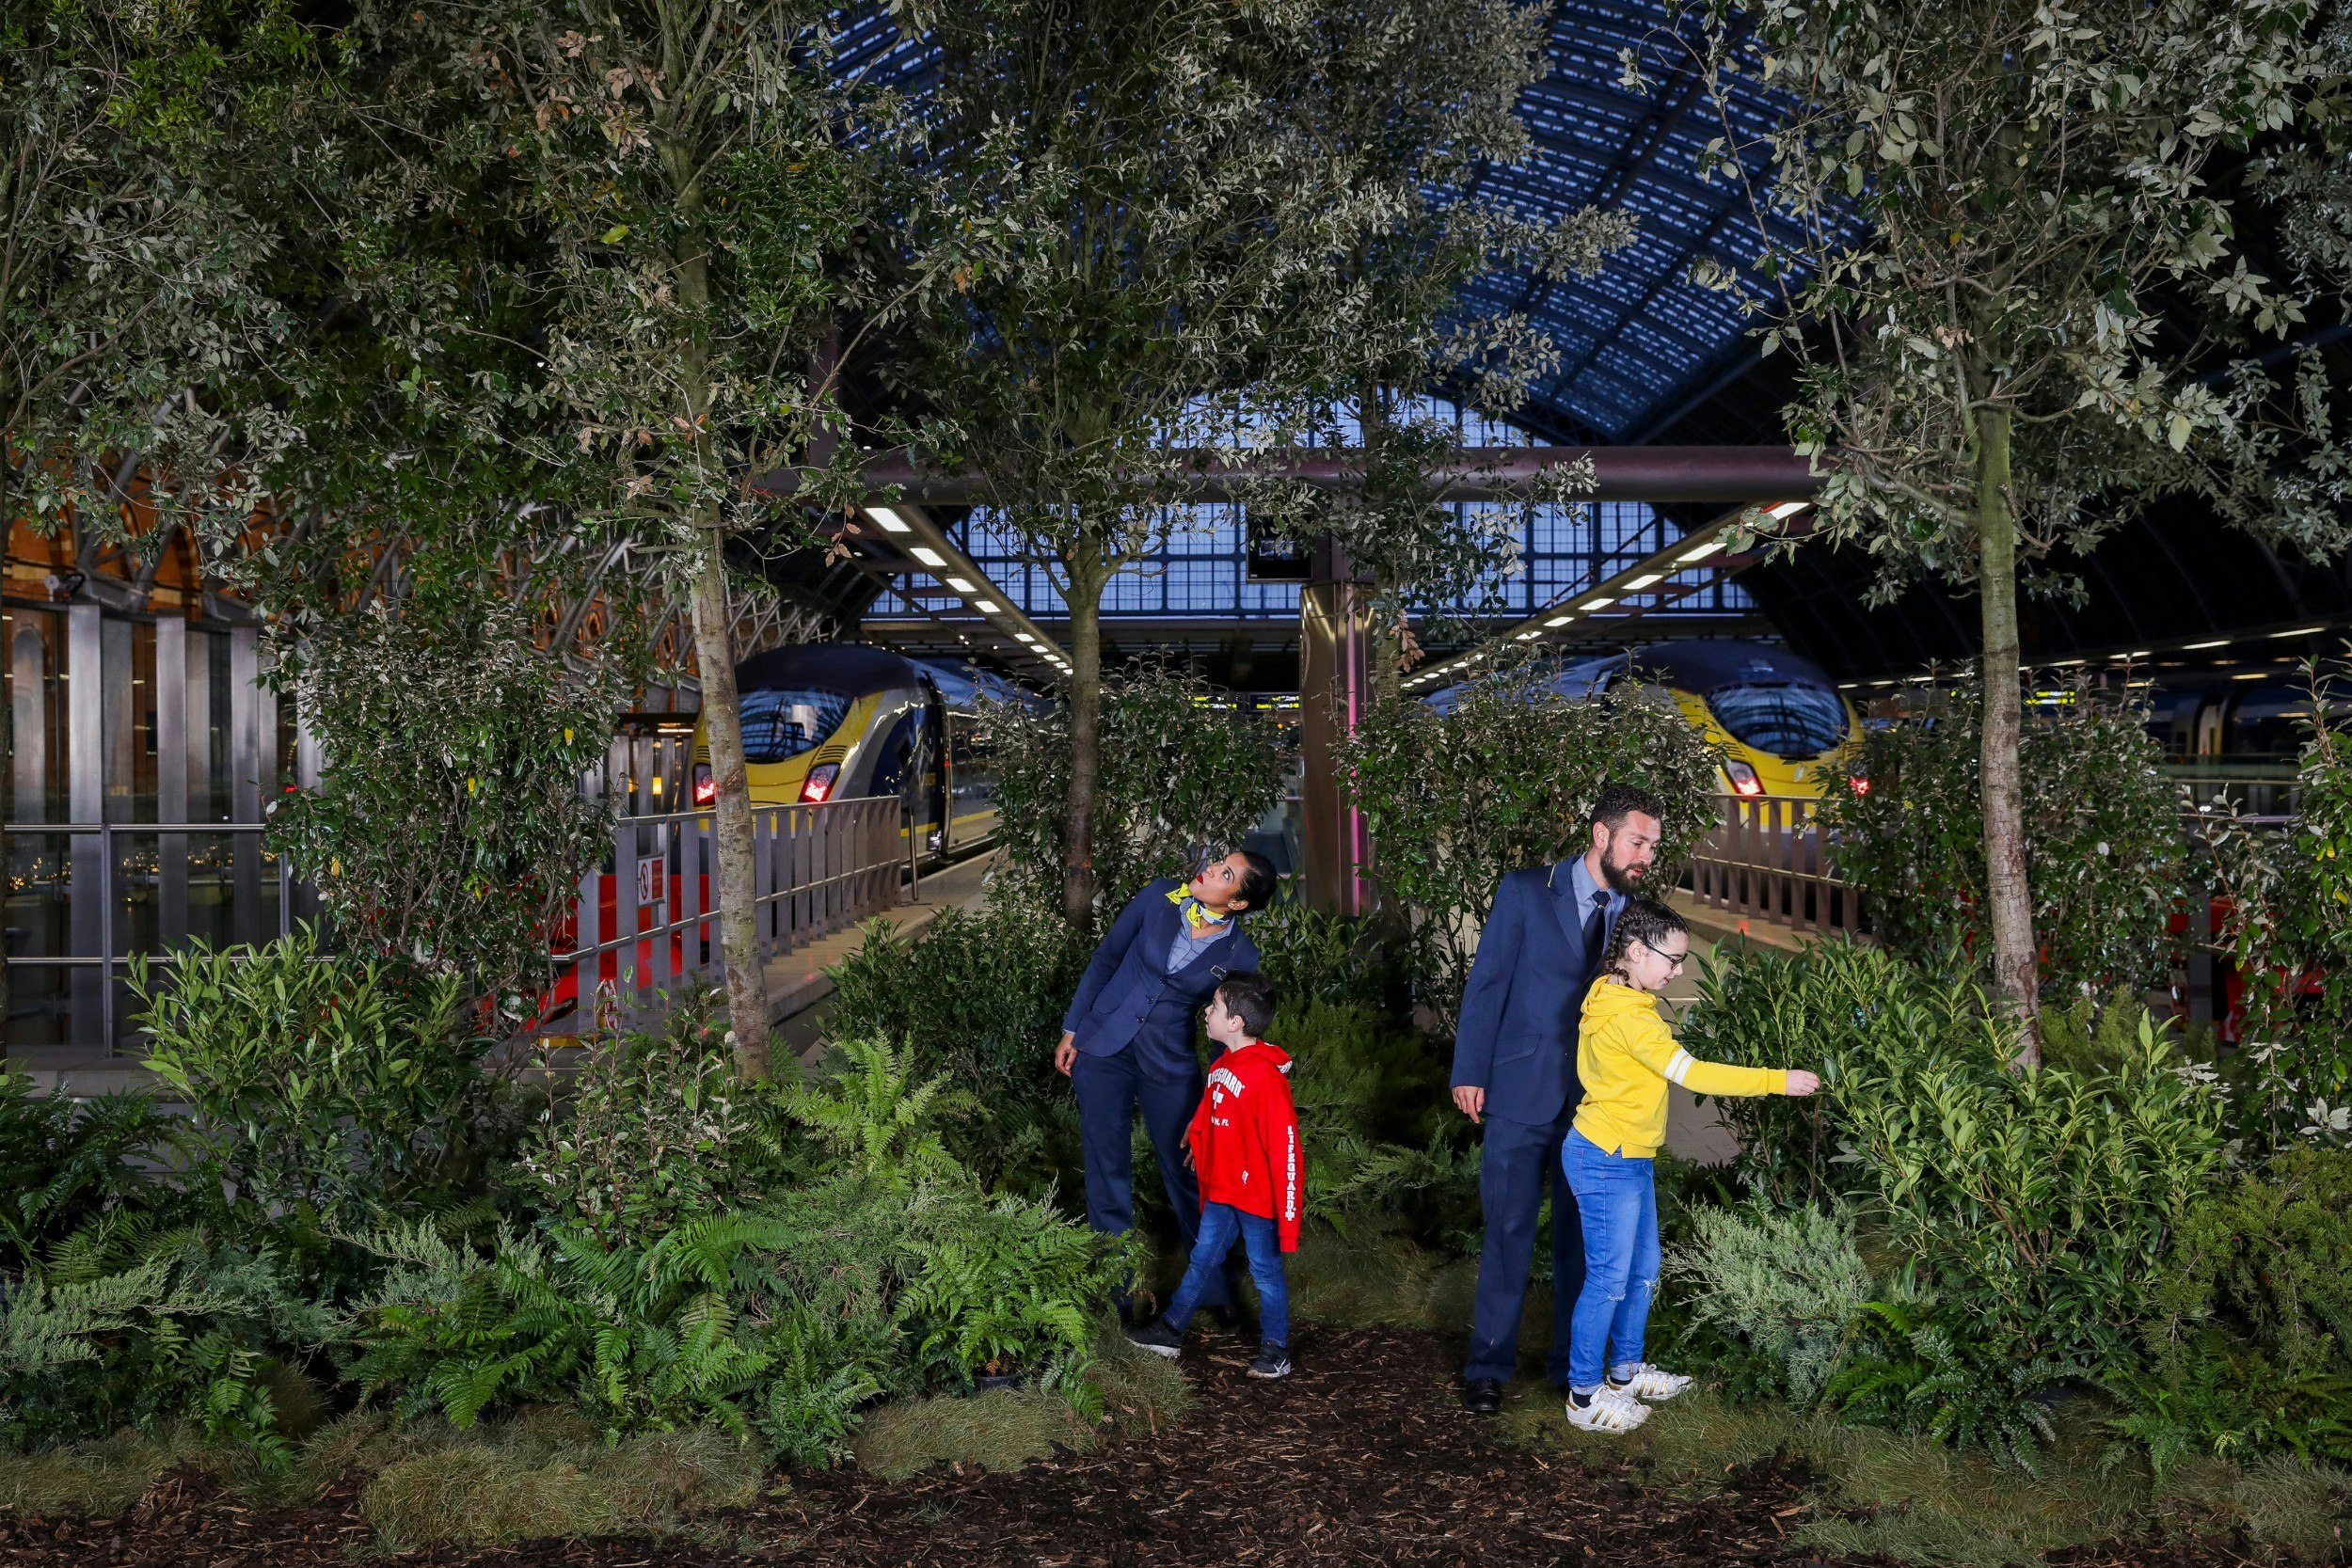 A woodland scene is created on the Eurostar platforms as the high-speed service marks its 25th anniversary with new environmental commitments at St Pancras Station